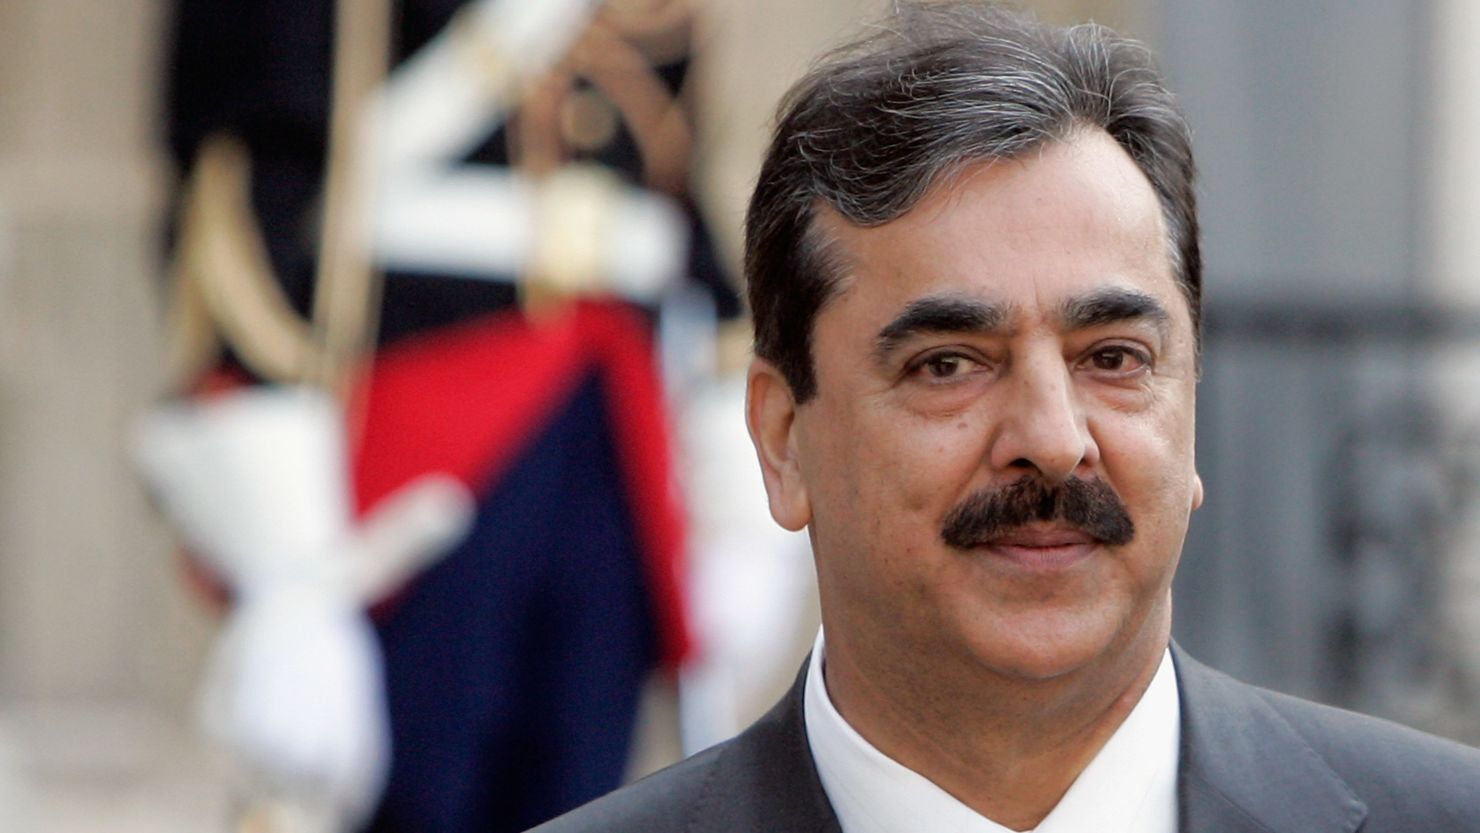 Pakistan's Supreme Court has ordered Prime Minister Yousuf Raza Gilani to face a contempt of court hearing this week.